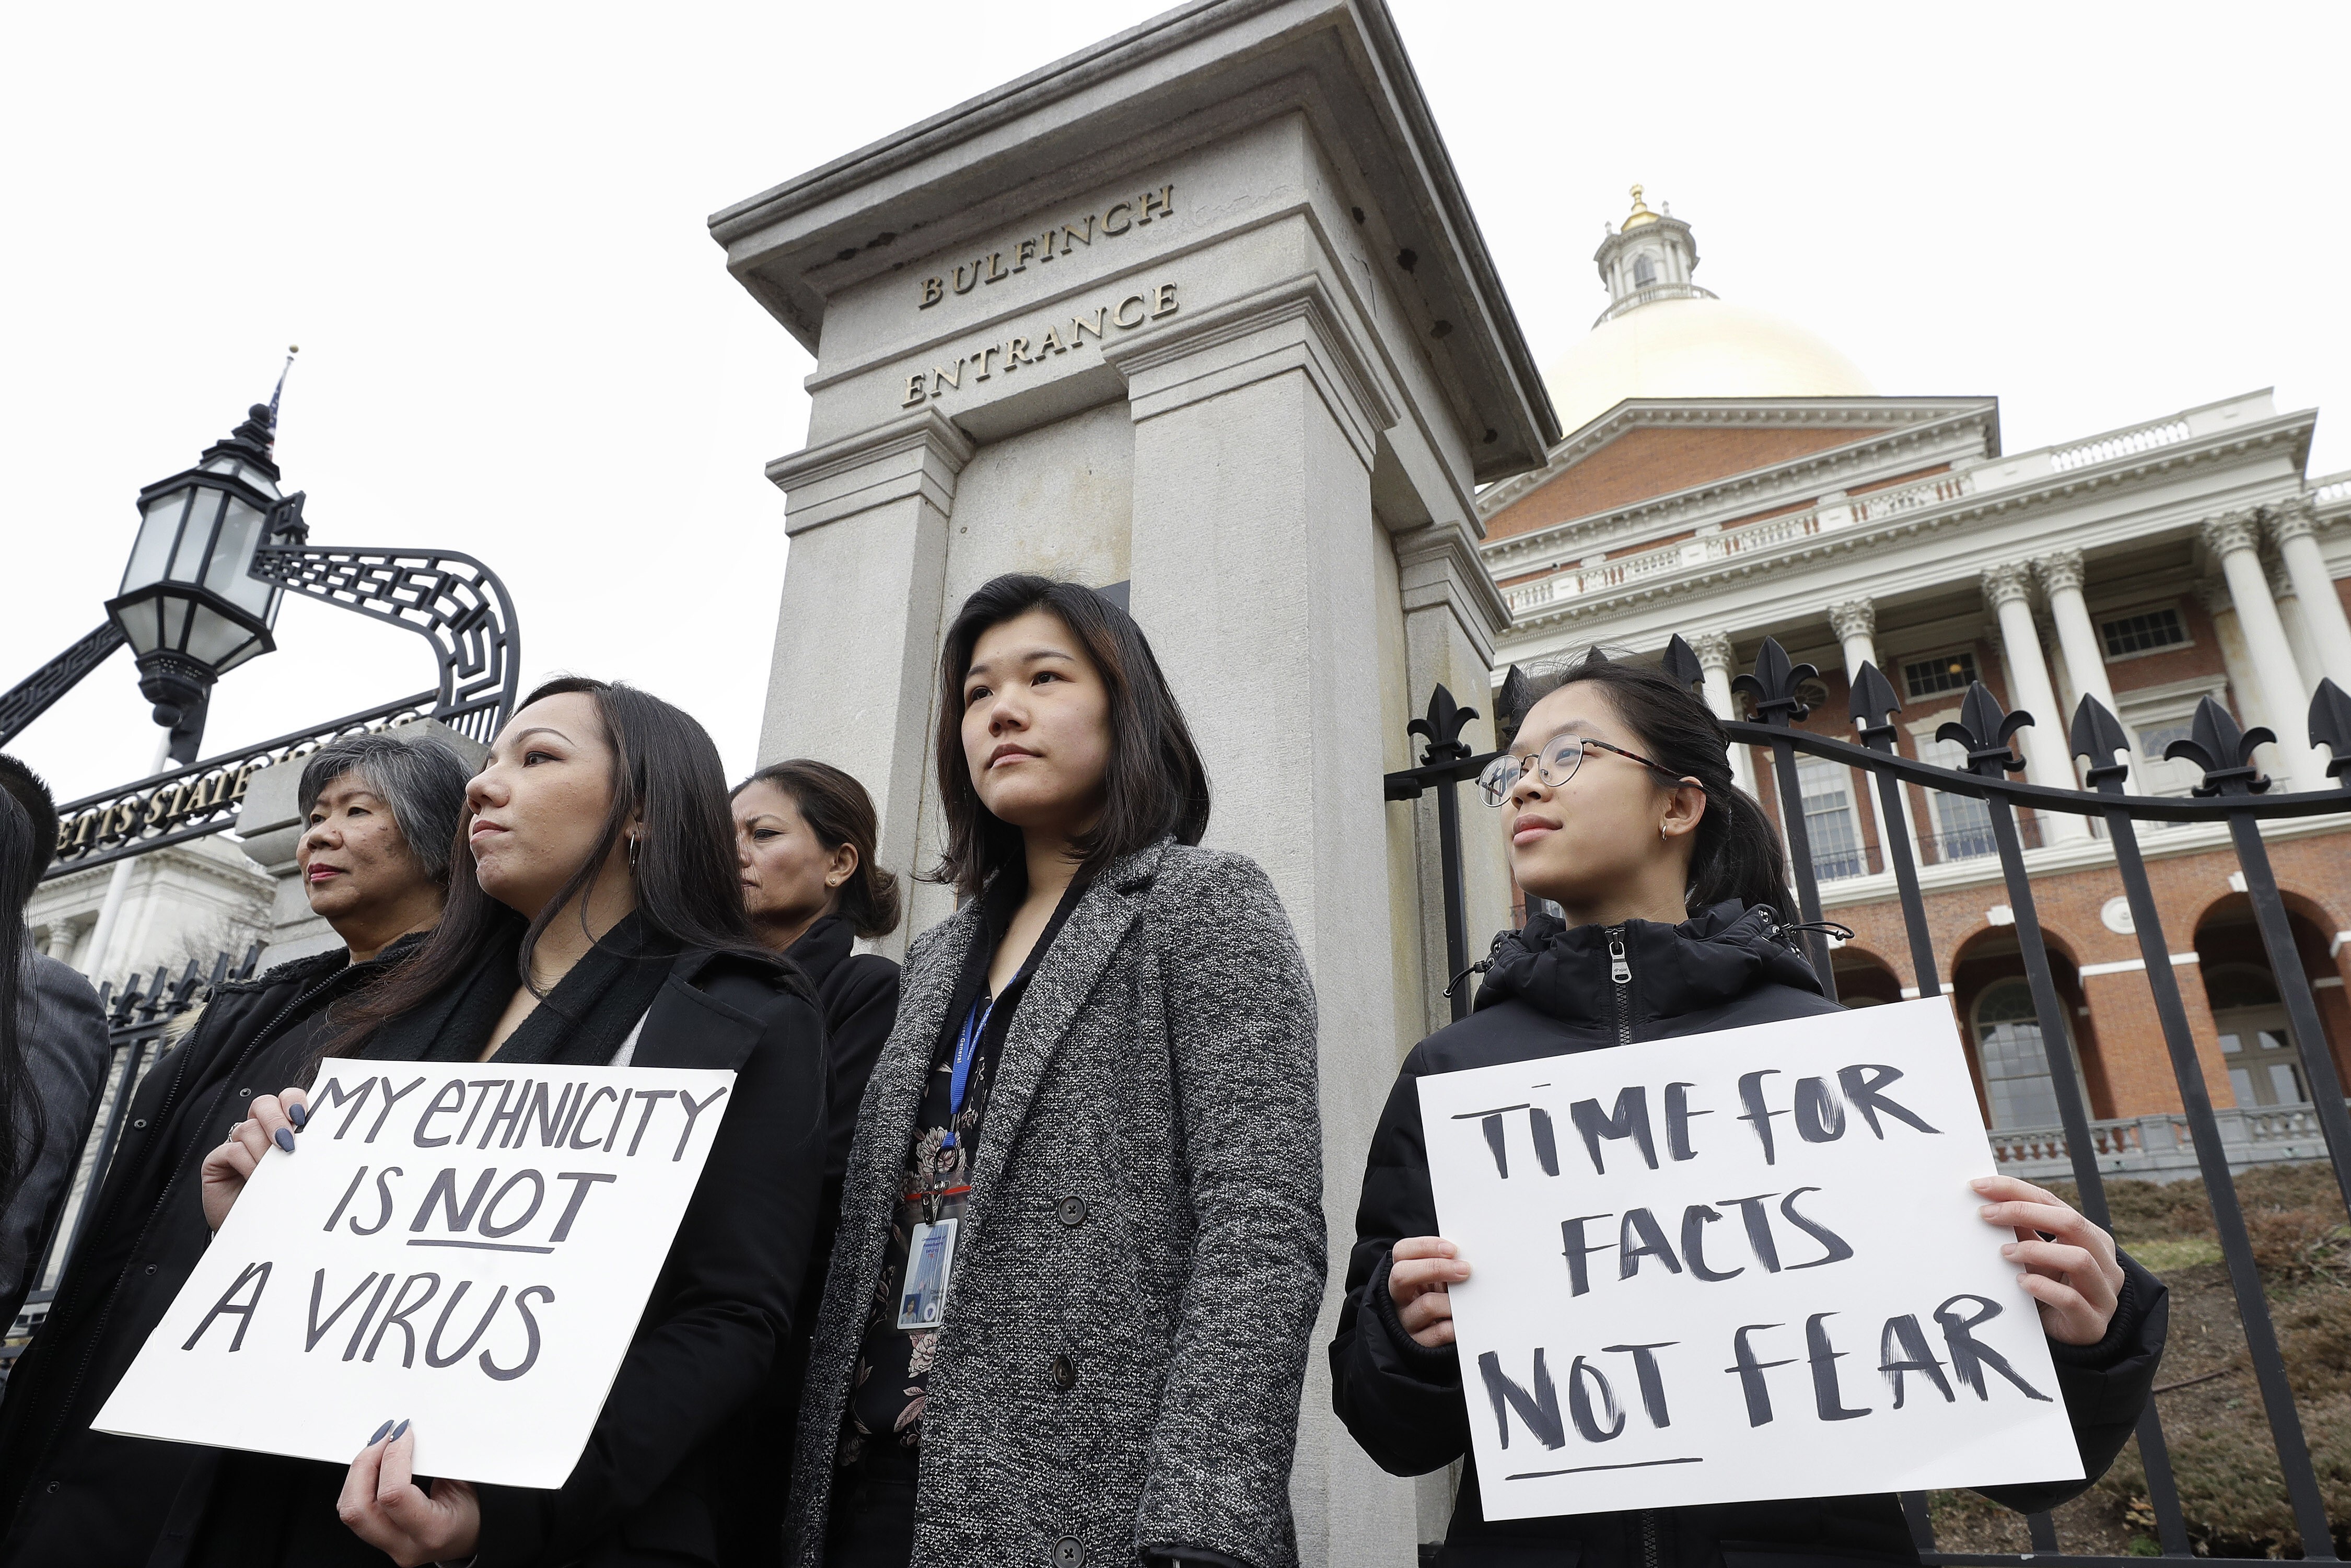 Asian-Americans from Boston’s Asian-American Commission protest on the steps of the Statehouse on March 12, against racism, fearmongering and misinformation aimed at Asian communities amid the pandemic. Photo: AP